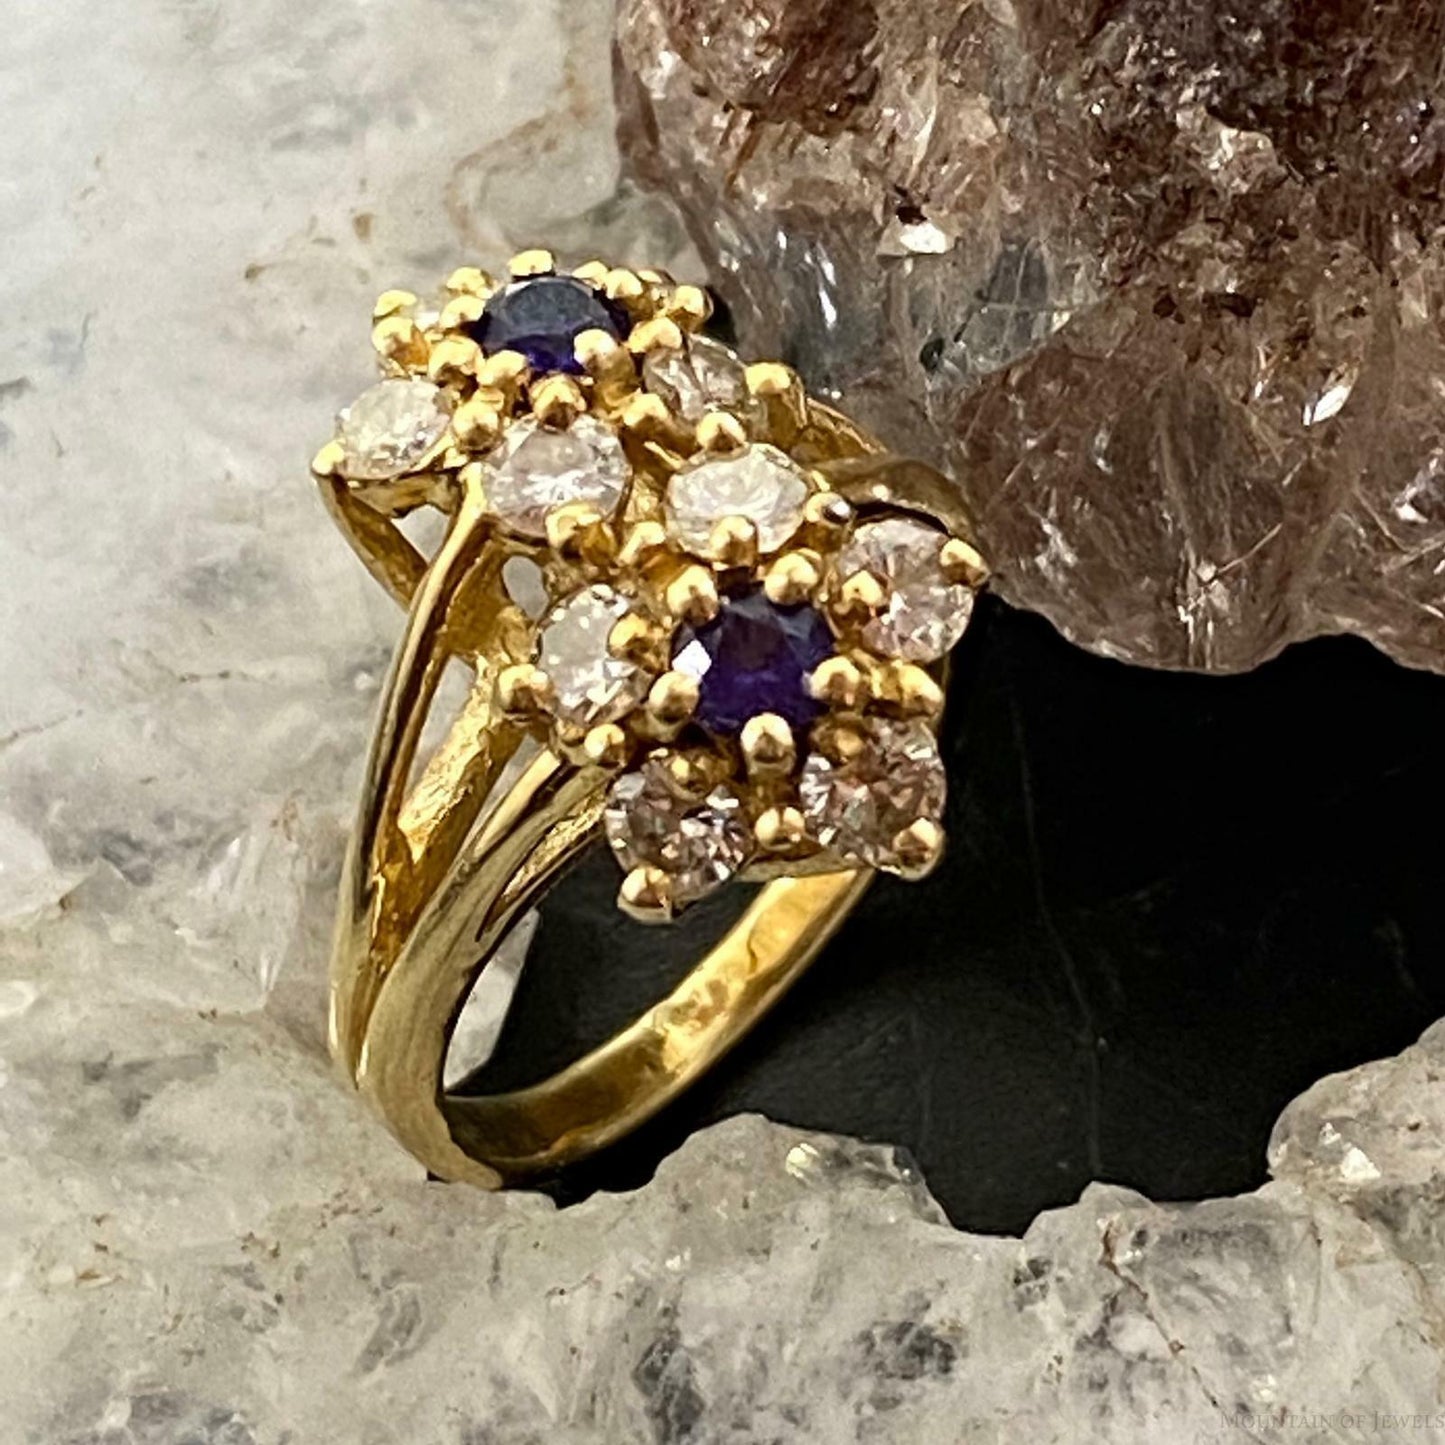 Vintage 14K Yellow Gold Diamonds & Sapphire Floral Lady's Ring Sz 4.5 For Women